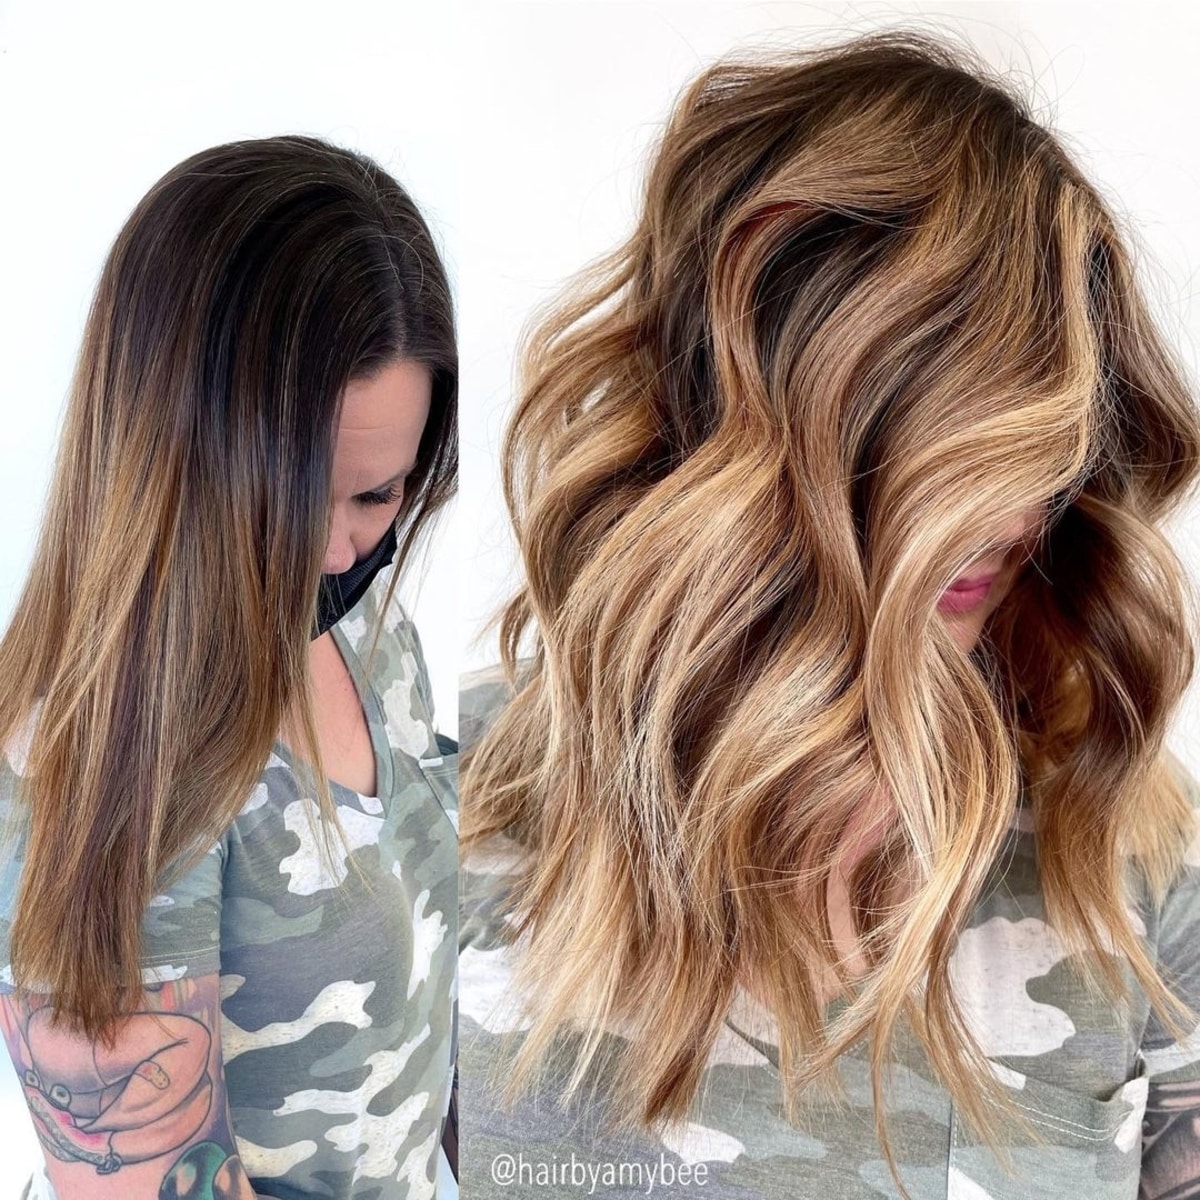 These 22 caramel hair color ideas are trending for 2021